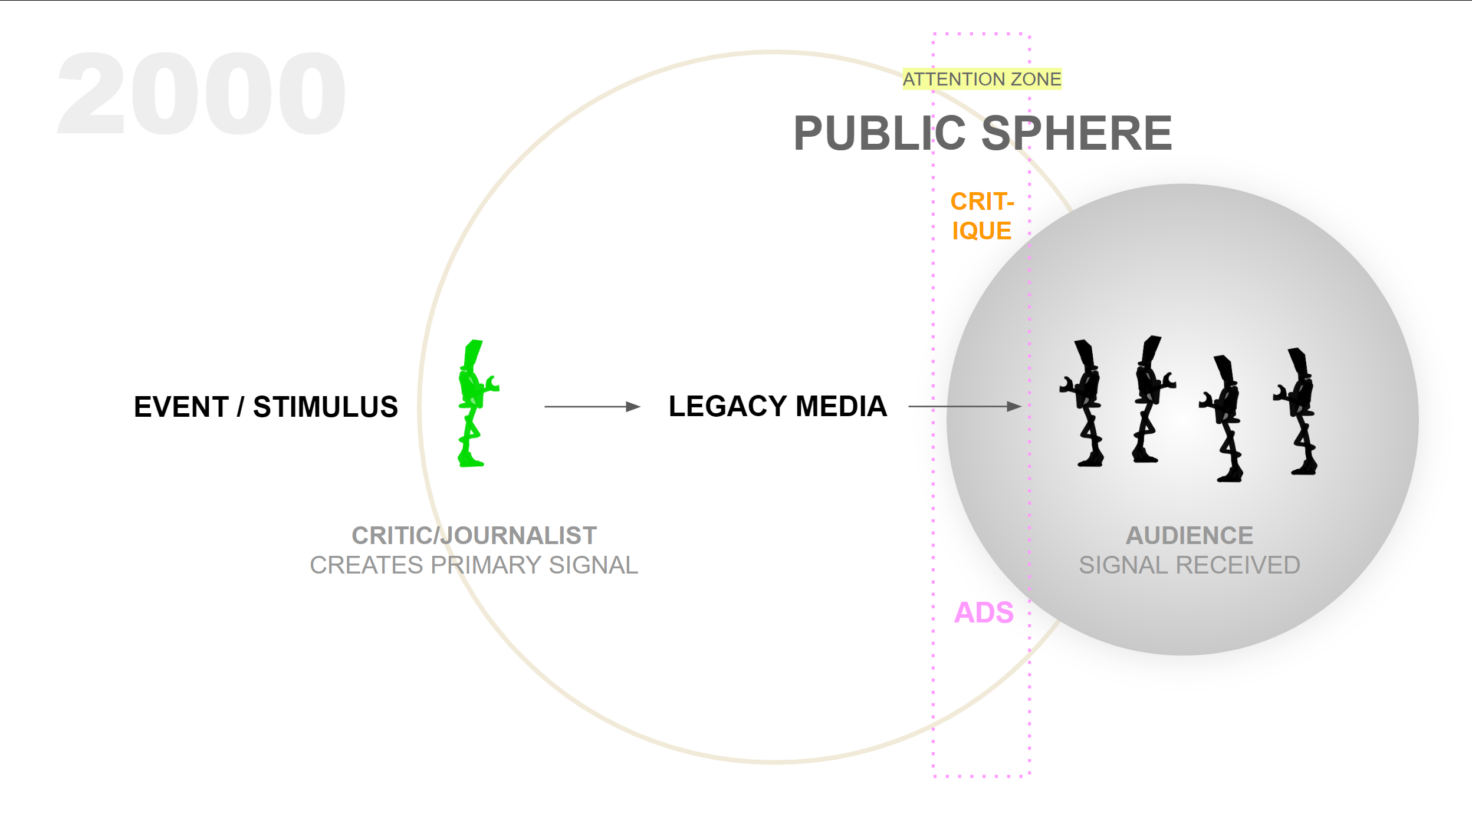 A diagram demonstrating how attention of media's audience functioned in the public sphere before digital media